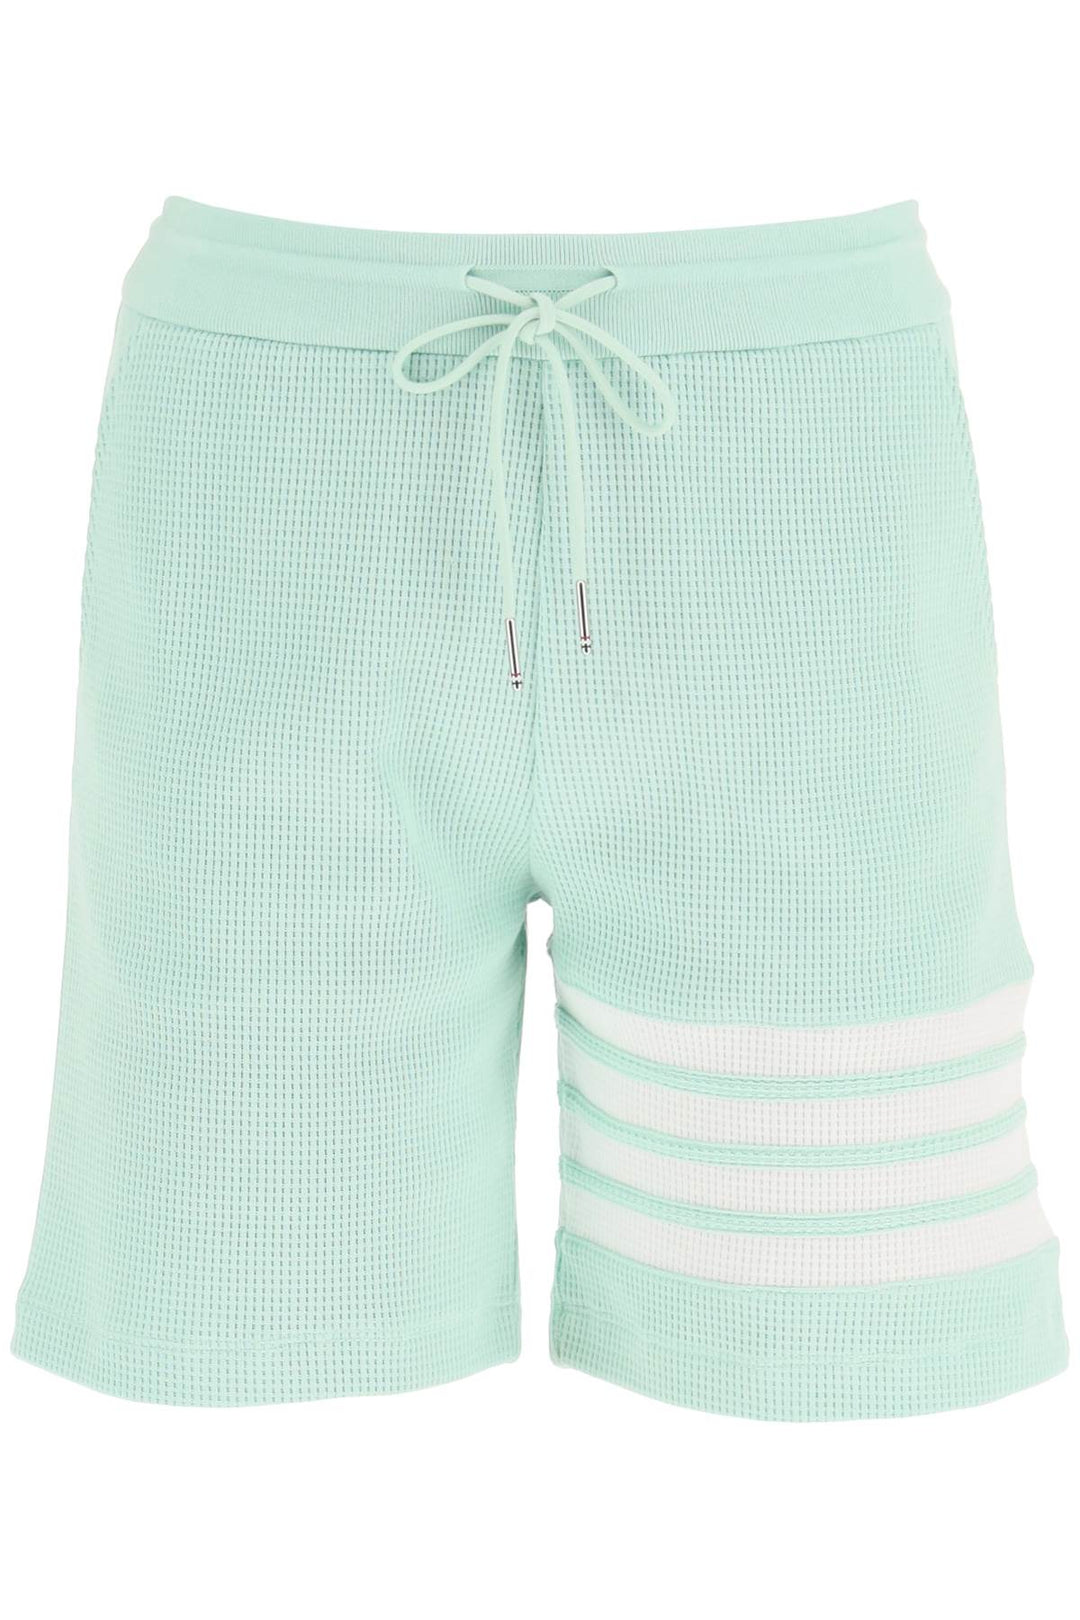 Thom Browne 4 Bar Shorts In Waffle Jersey   Verde